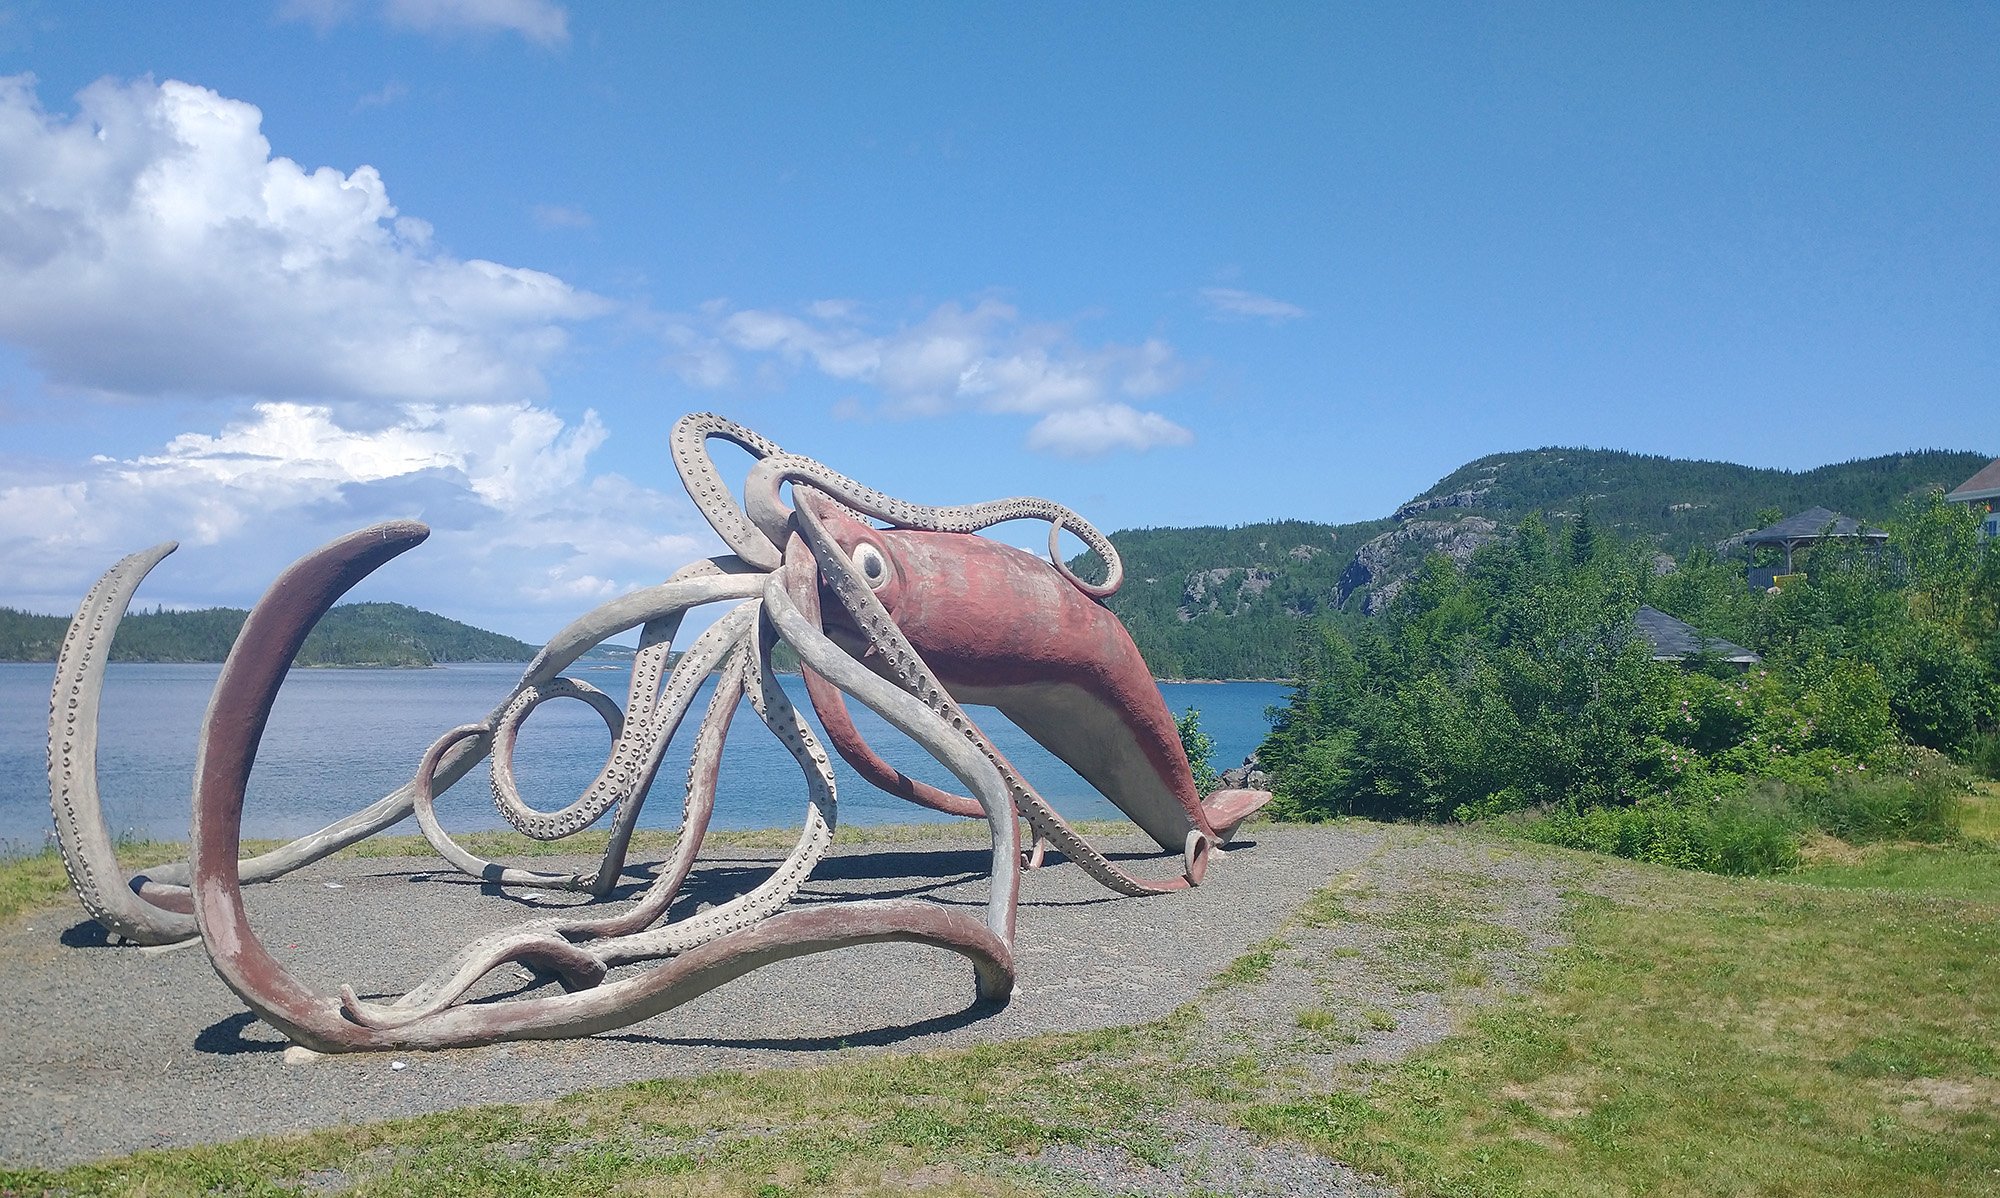 So they built a life-sized replica of their best guess as the the squid's actual size. The fishermen turned it into dog food before it could be properly studied...